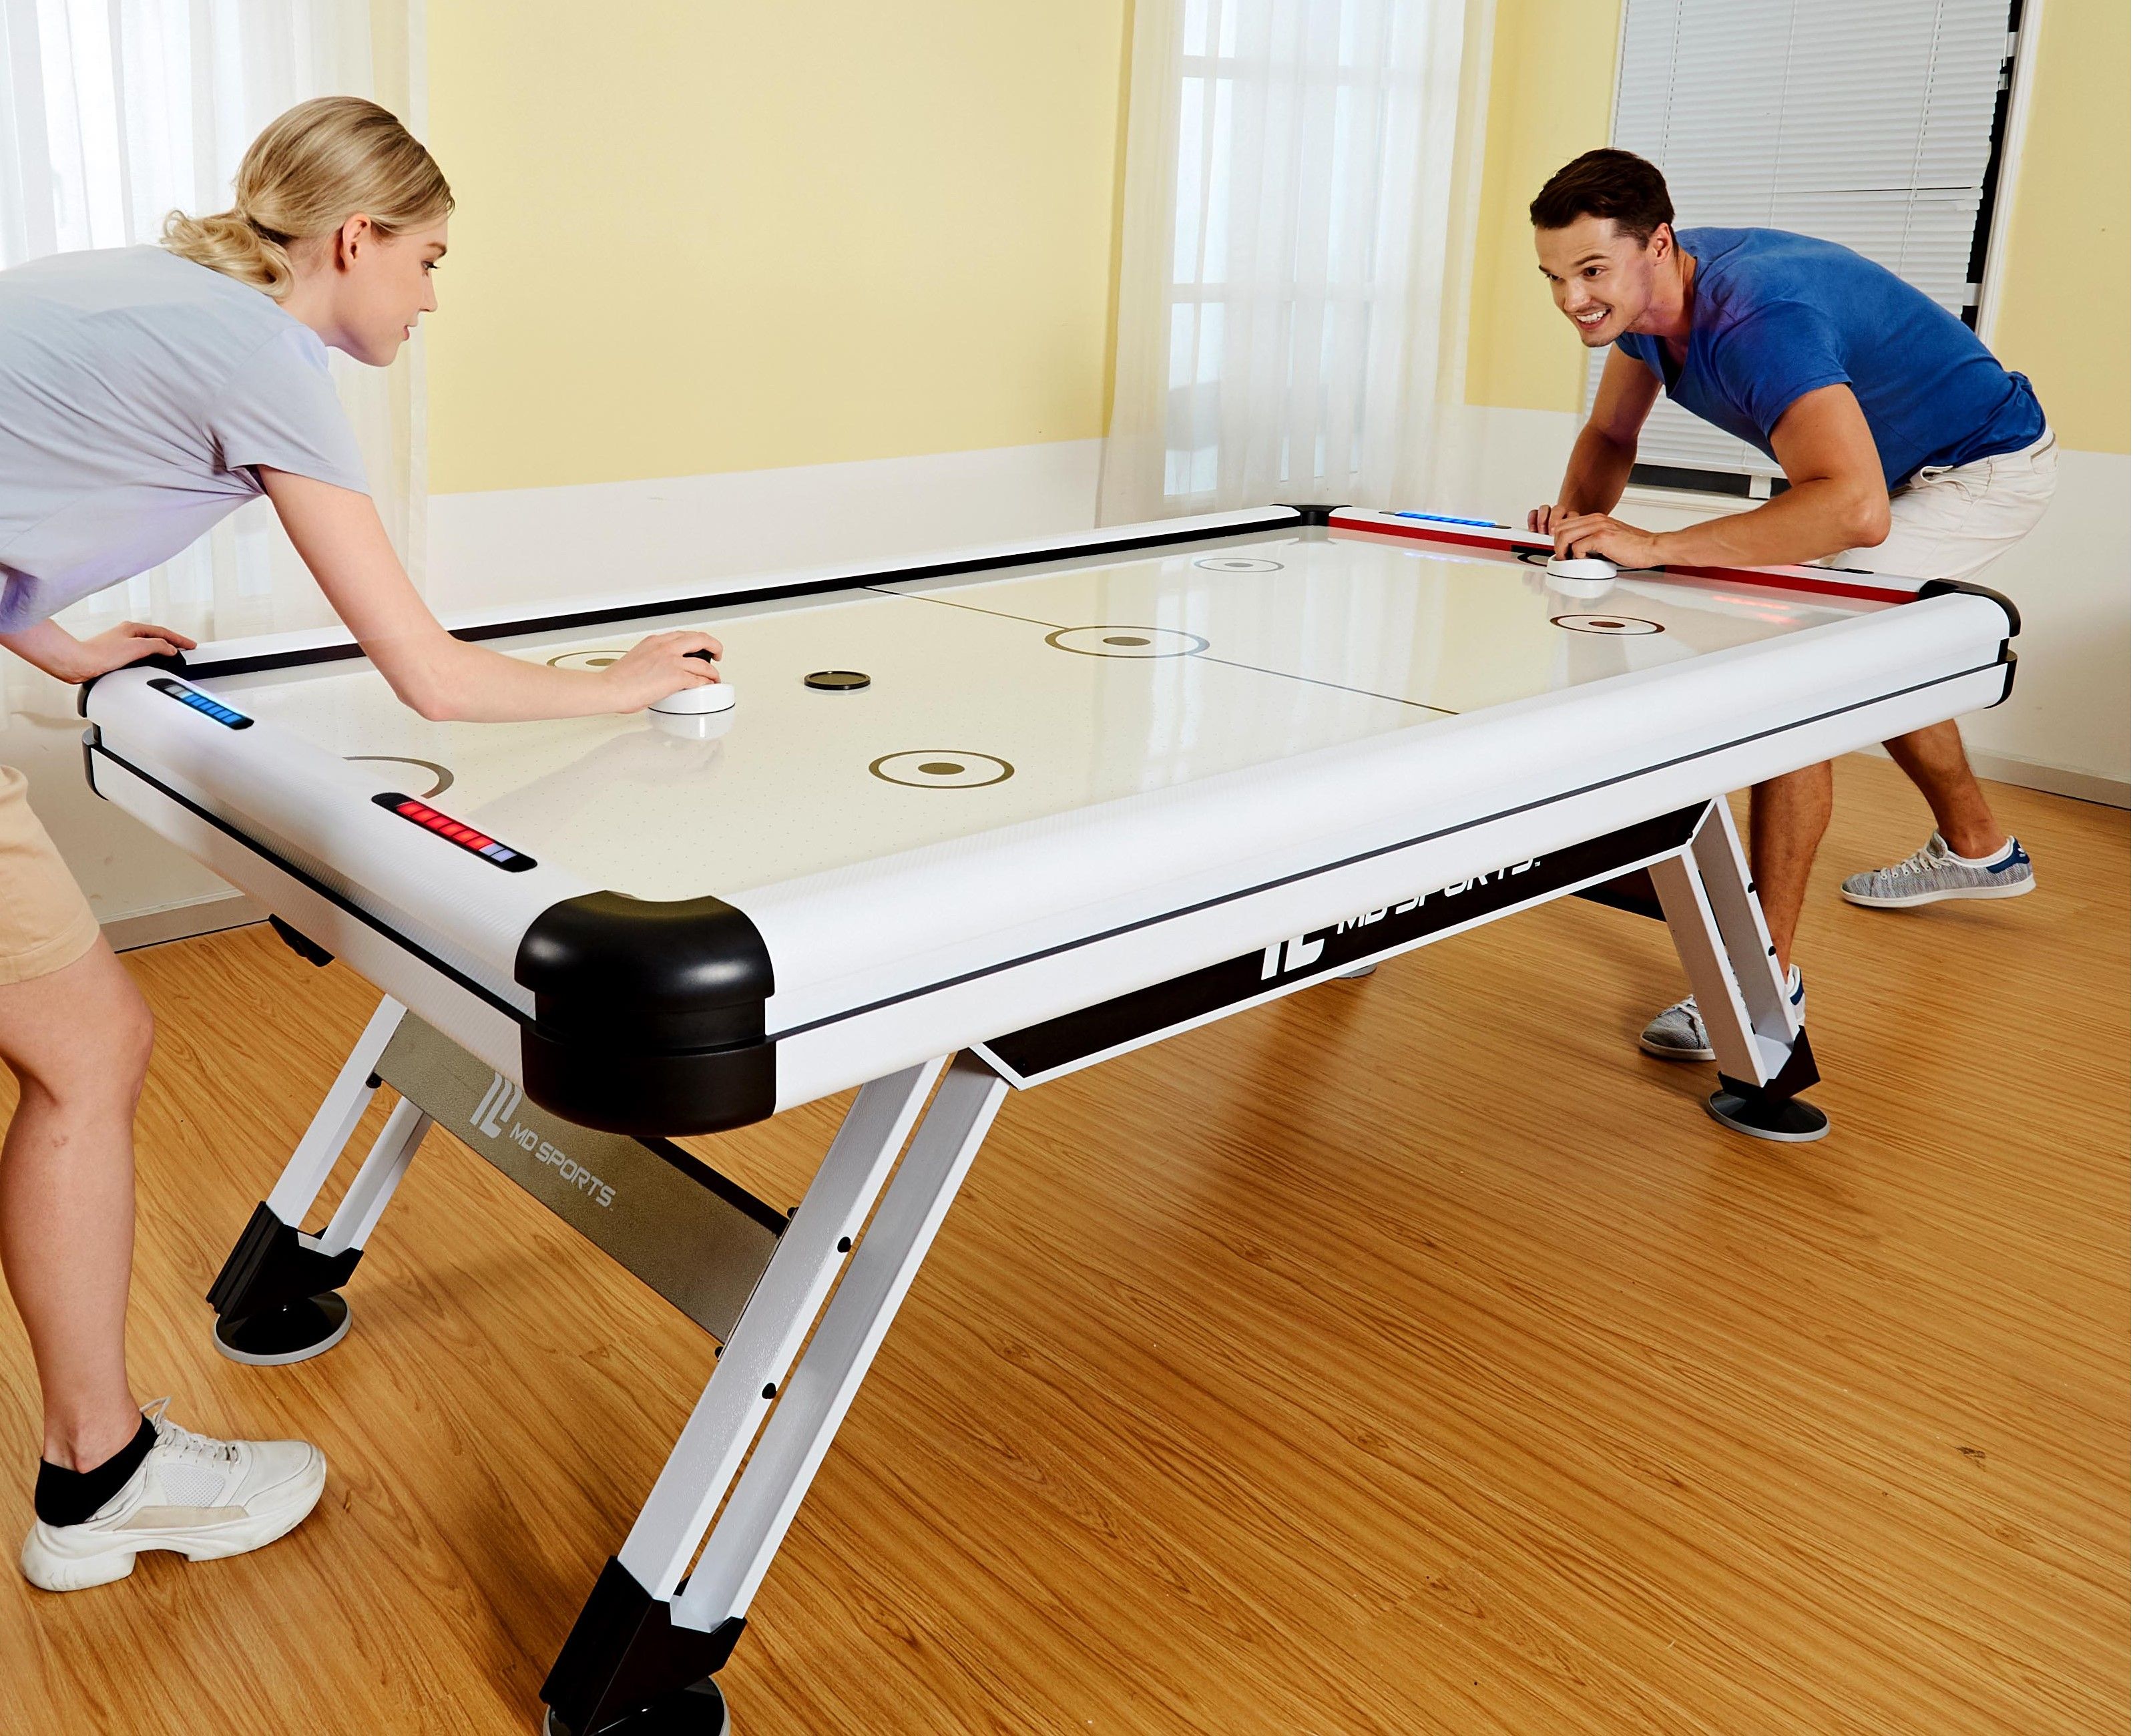 Medal Sports 89 Air Hockey Table Includes 4 Pushers And 4 Pucks